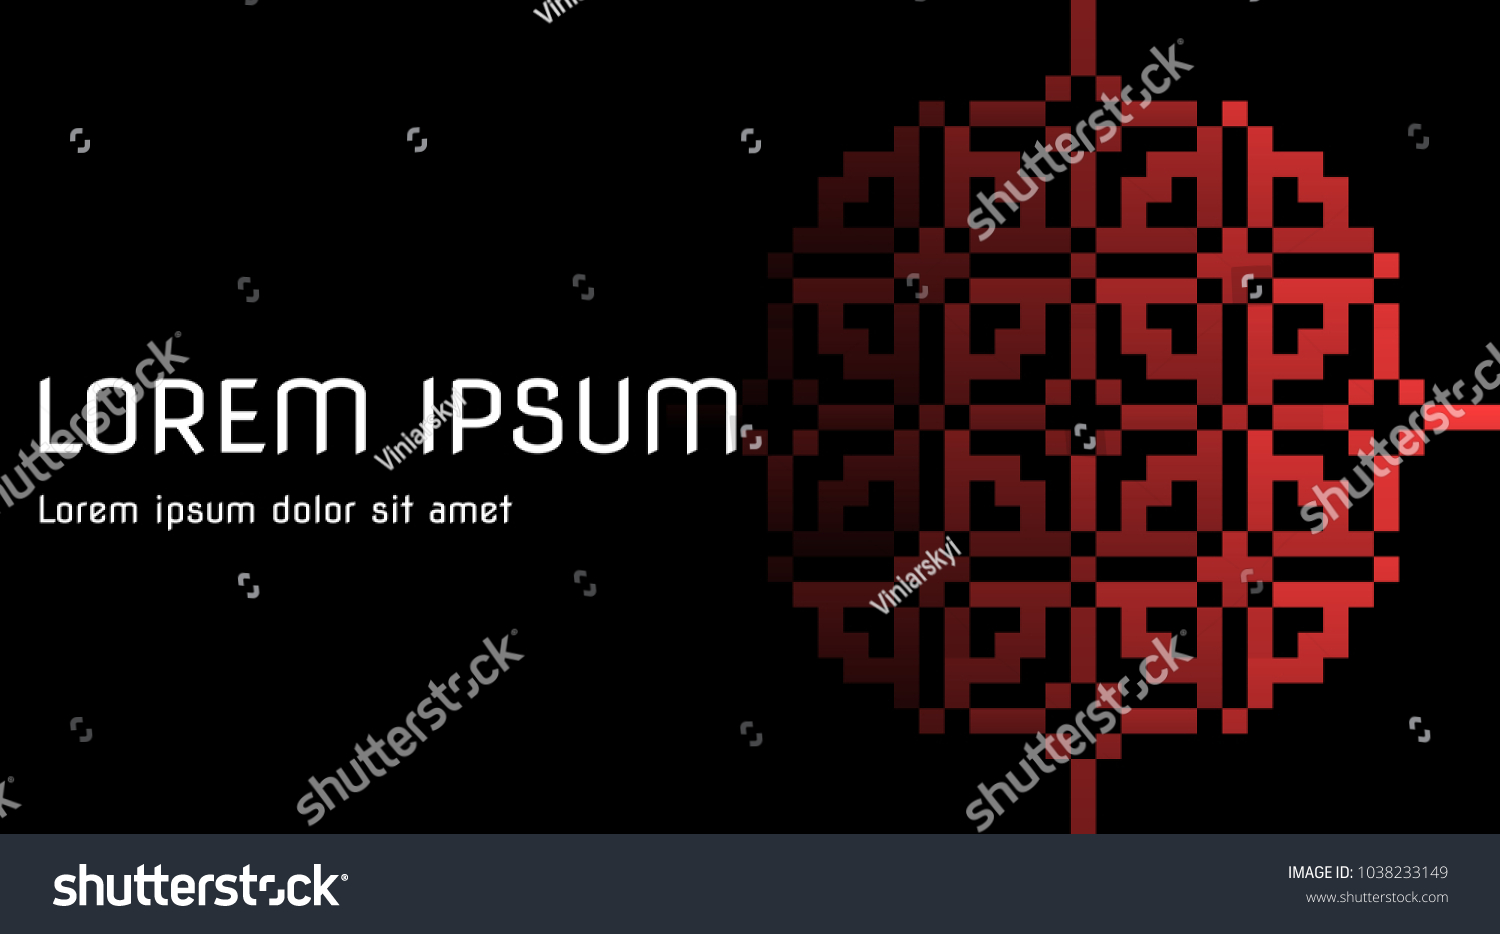 SVG of vector background for business cards, invitations and presentations. vertically oriented circle-shaped ukrainian ornament from the right. svg